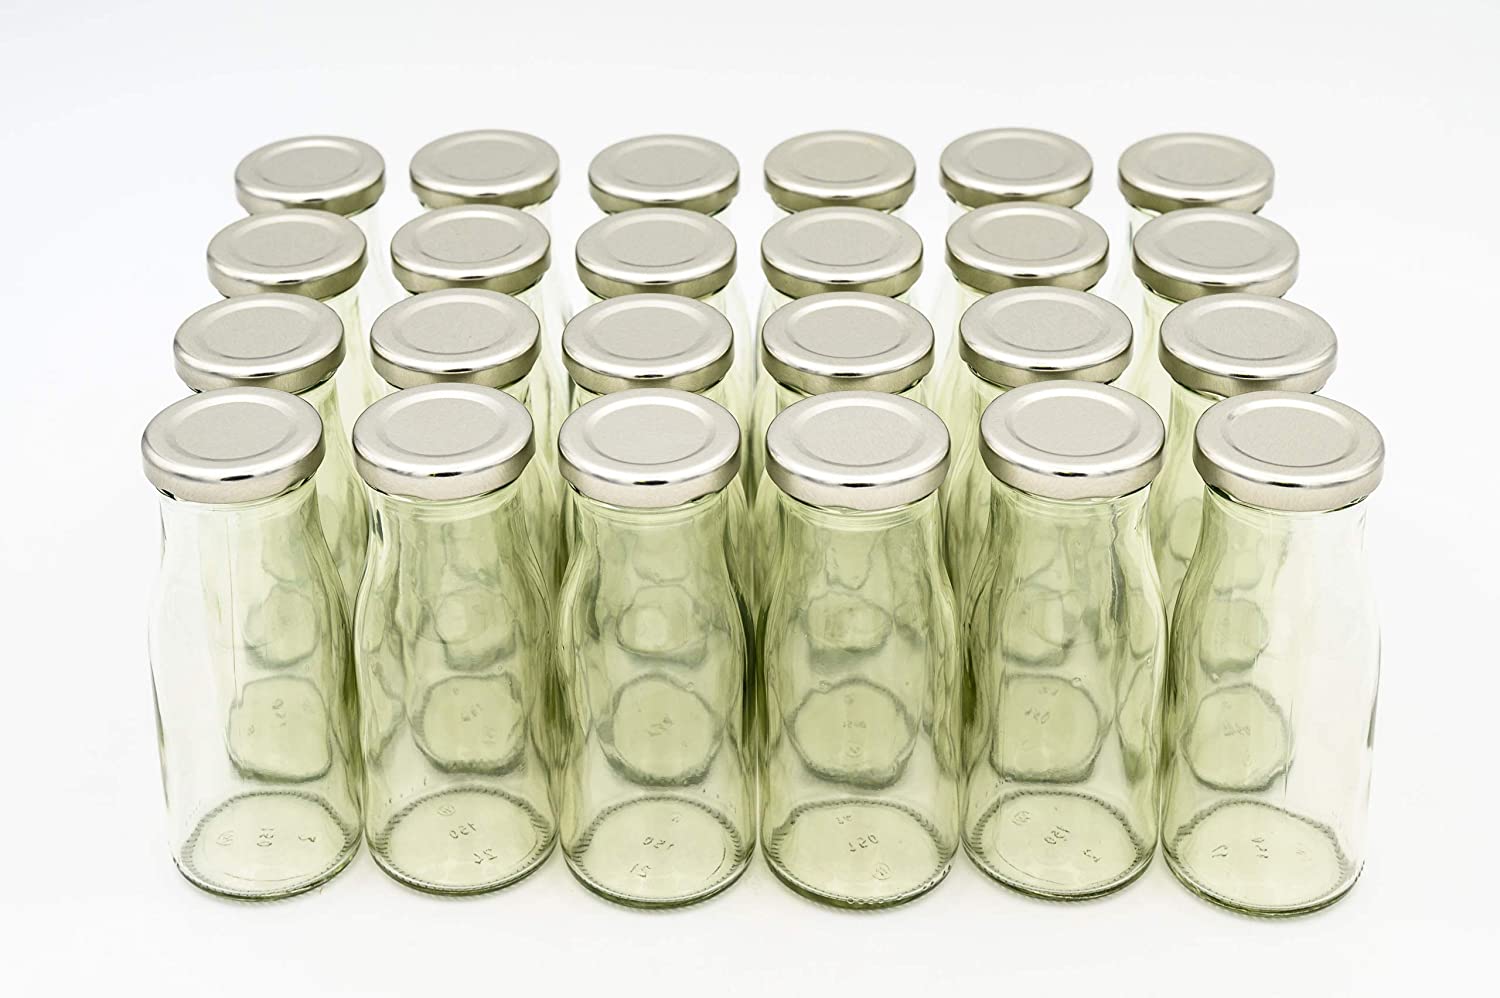 flaschenbauer.de 24 Empty Bottles, Small Glass Bottles 150ml White TO43 with Silver Cap Small bottles for filling milk bottles, juice bottles, schnapps bottles small or can be used as vase decoration